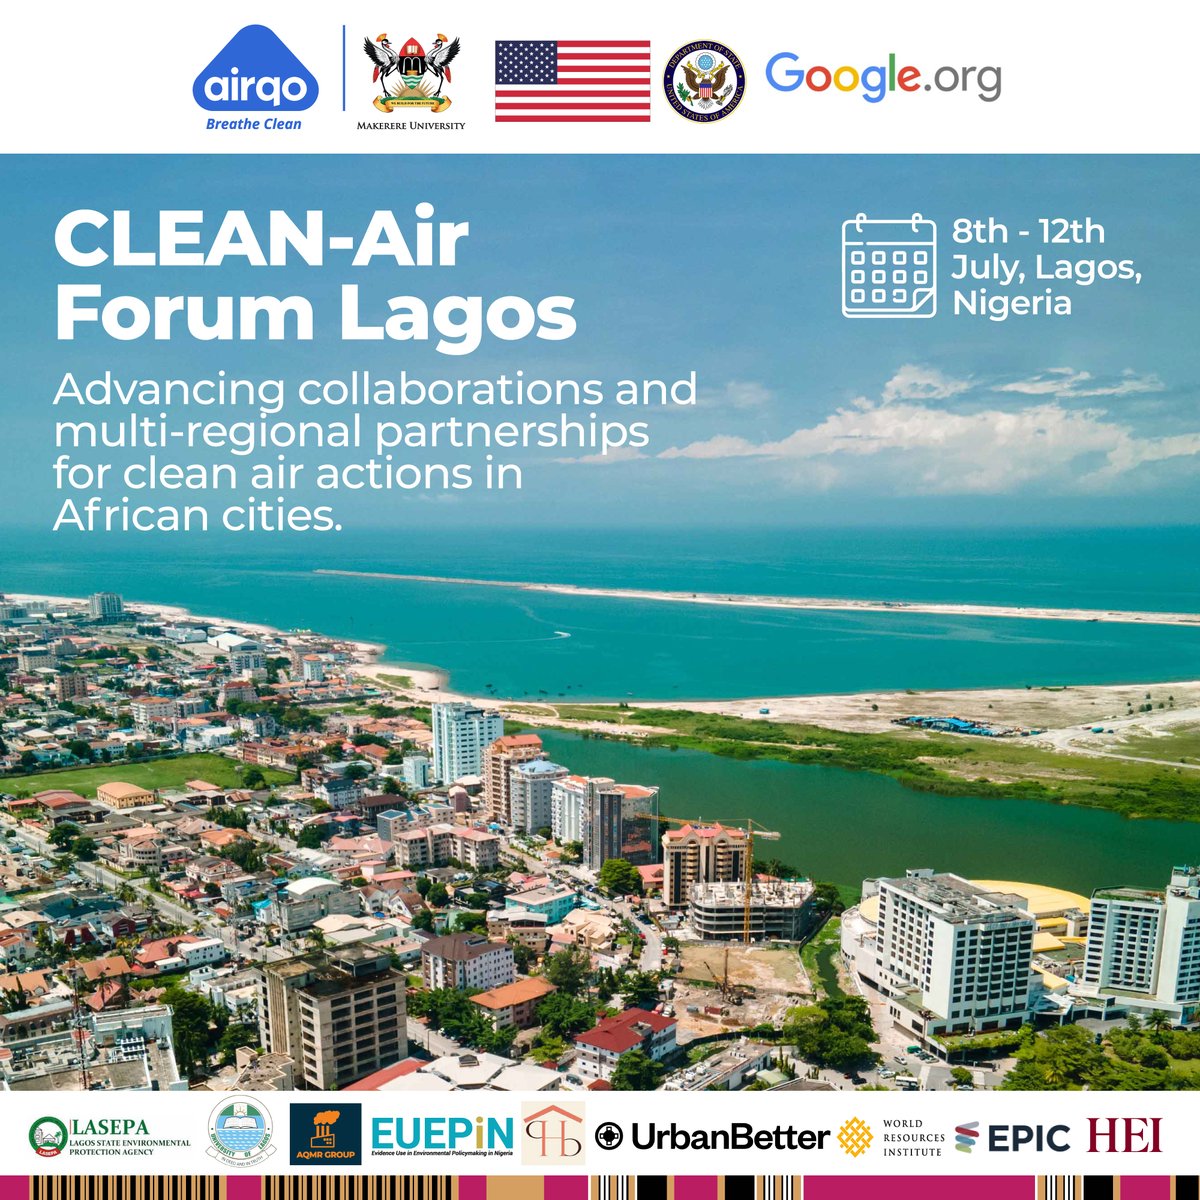 #CleanAirForumLagos will convene Africa’s policymakers, civil society organisations, private sector, development partners, and scientific communities to discuss a shared vision for clean air in African Cities. Learn more: bit.ly/4aLXIN5 #AirQuality @AirQoProject